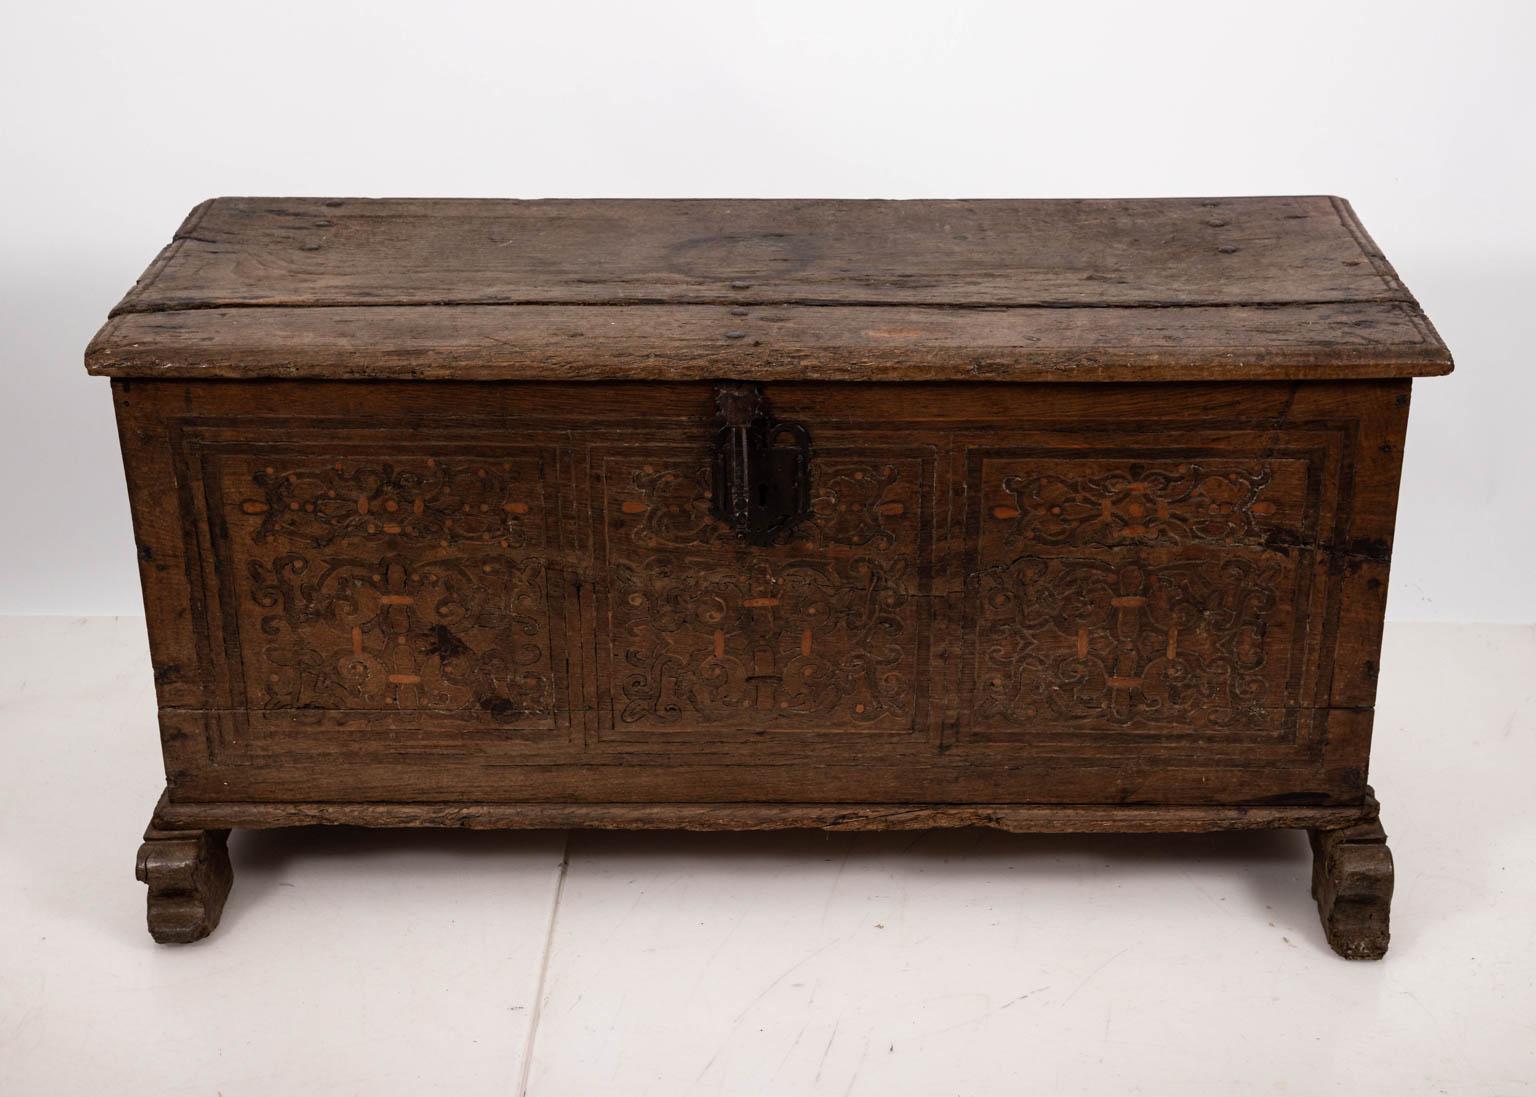 Continental style blanket chest in oakwood with carved geometric panels and metal hardware, circa 18th century. Please note of wear consistent with antique age including cracks, chips, and wood loss.